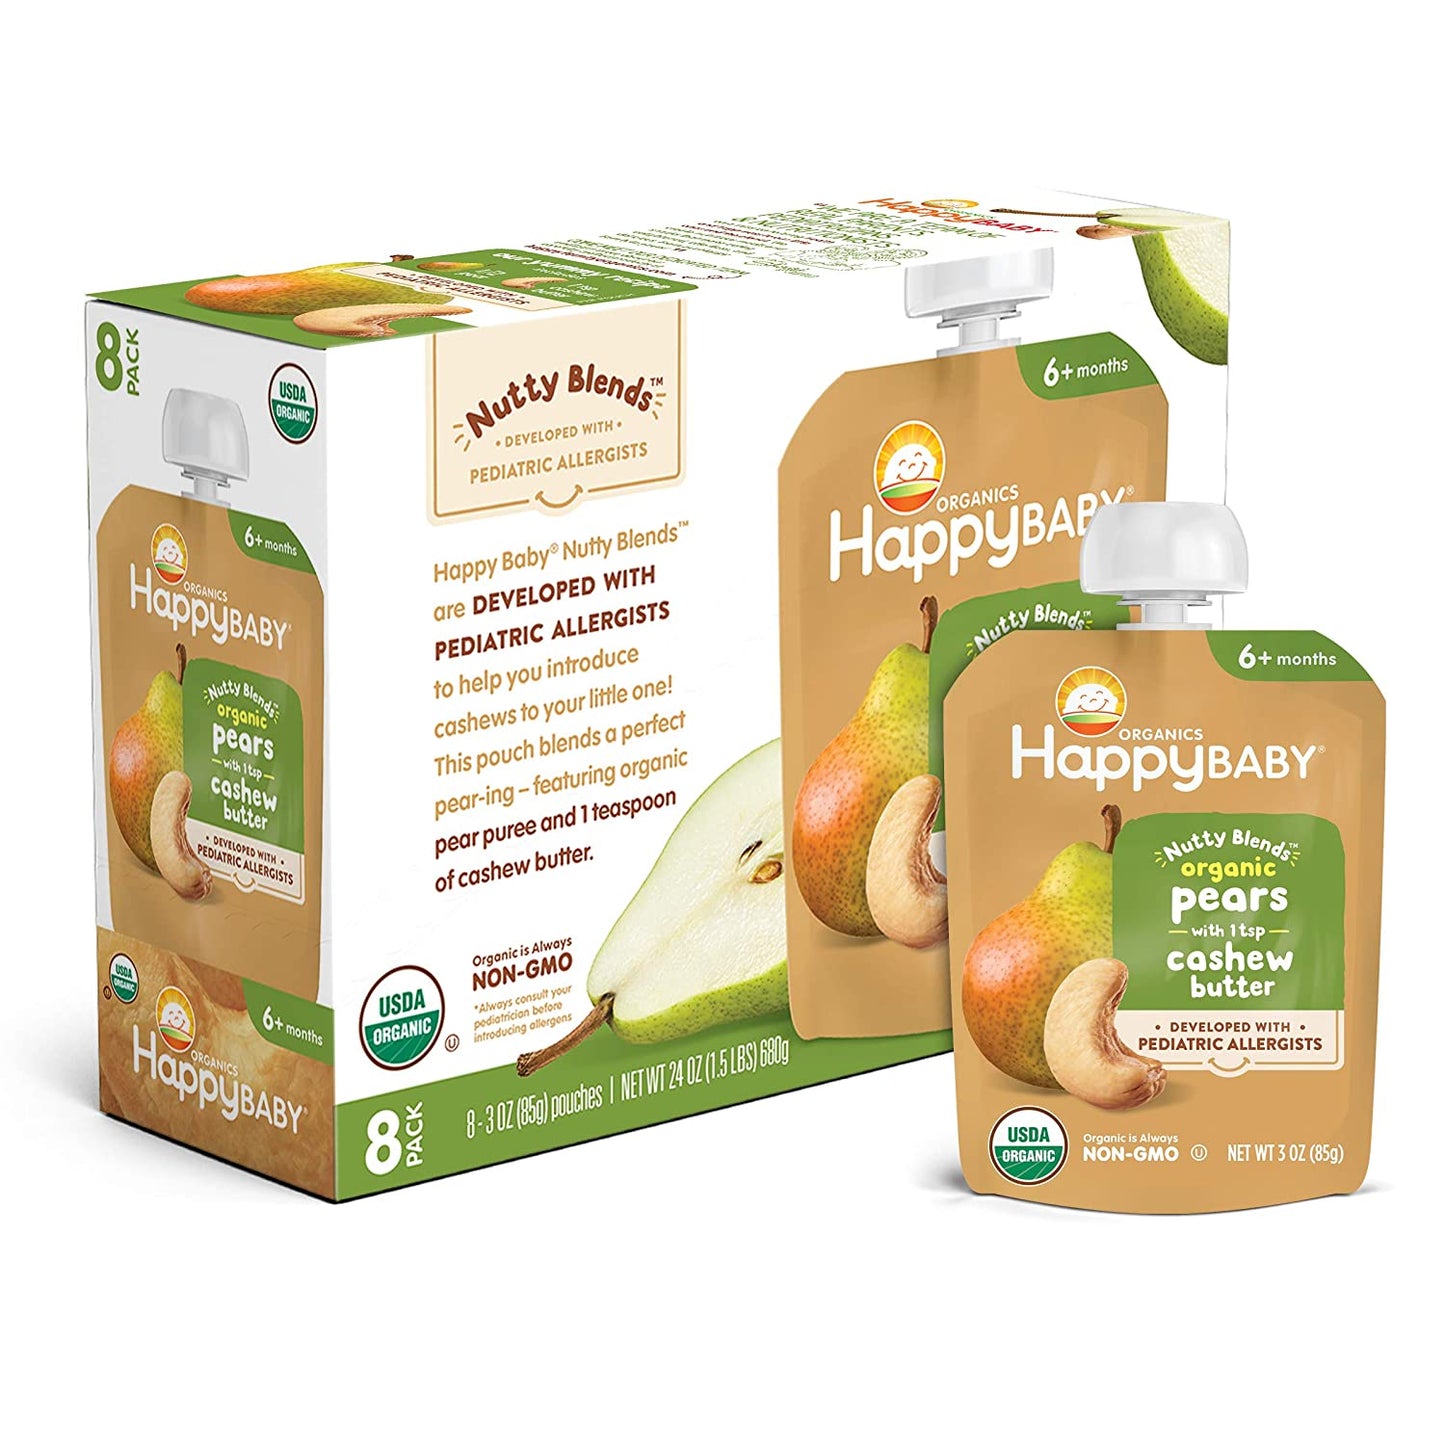 Happy Baby Organics Nutty Blends Organic Pears with 1 tsp Cashew Butter 3 oz Pouch (Pack of 8)